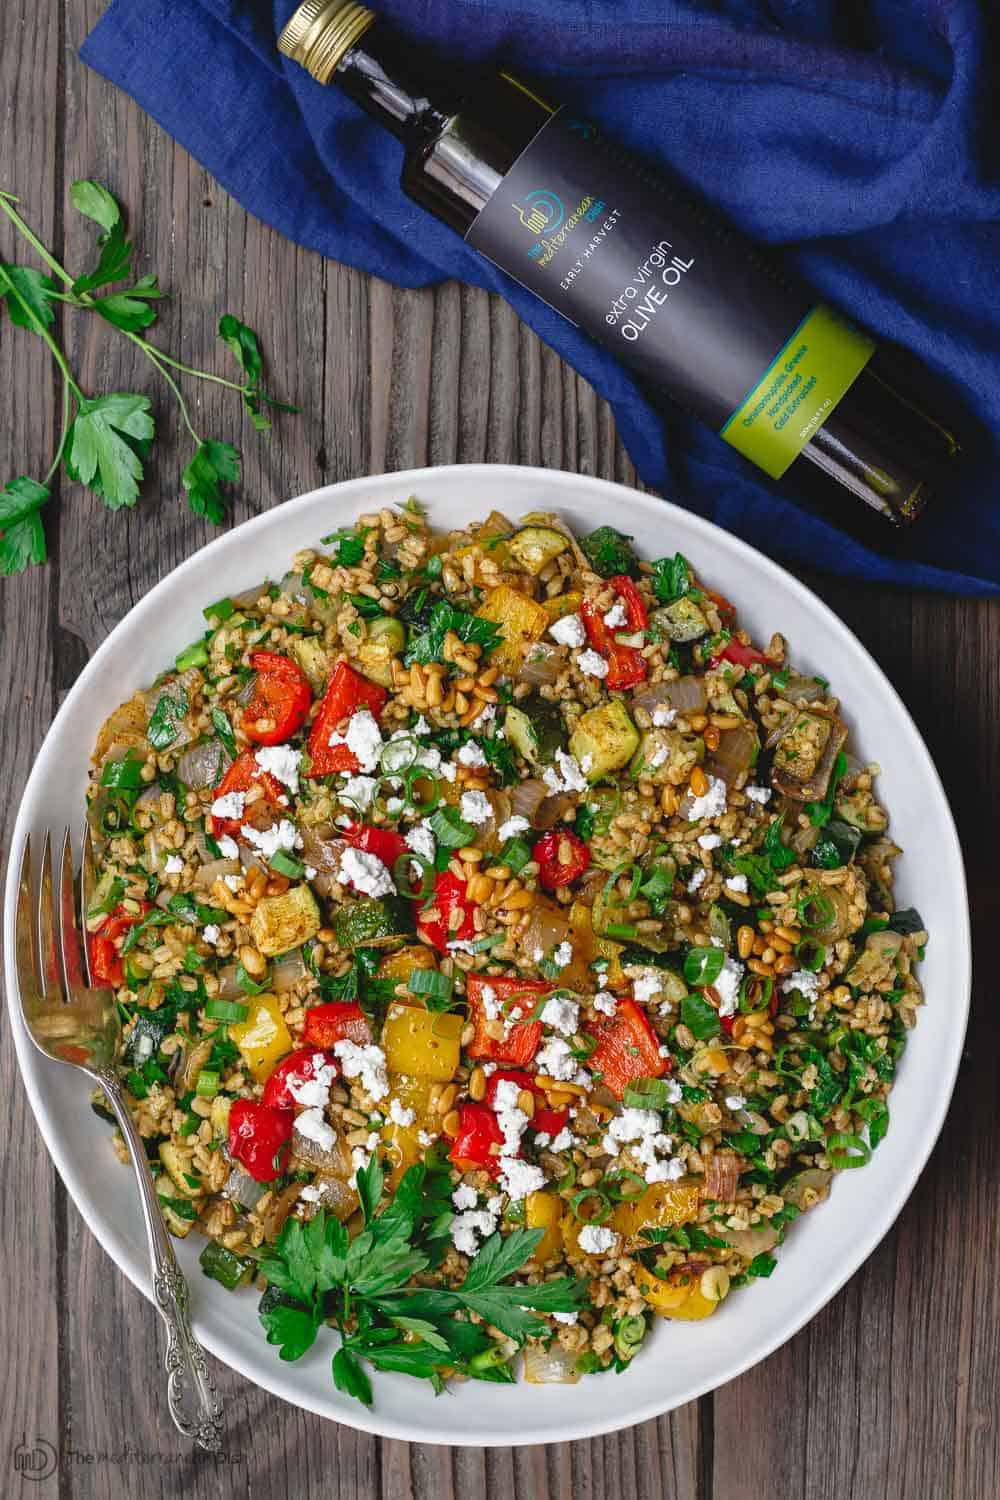 Mediterranean Roasted Vegetable Barley Recipe | The Mediterranean Dish. Easy, satisfying vegetarian barley recipe, prepared Mediterranean style. Tons of flavor from fresh herbs, spices and a simple zesty dressing. Perfect for meal prep. Recipe from TheMediterraneandish.com #barley #barleysalad #roastedvegetables #mediterraneandiet #mediterraneanfood